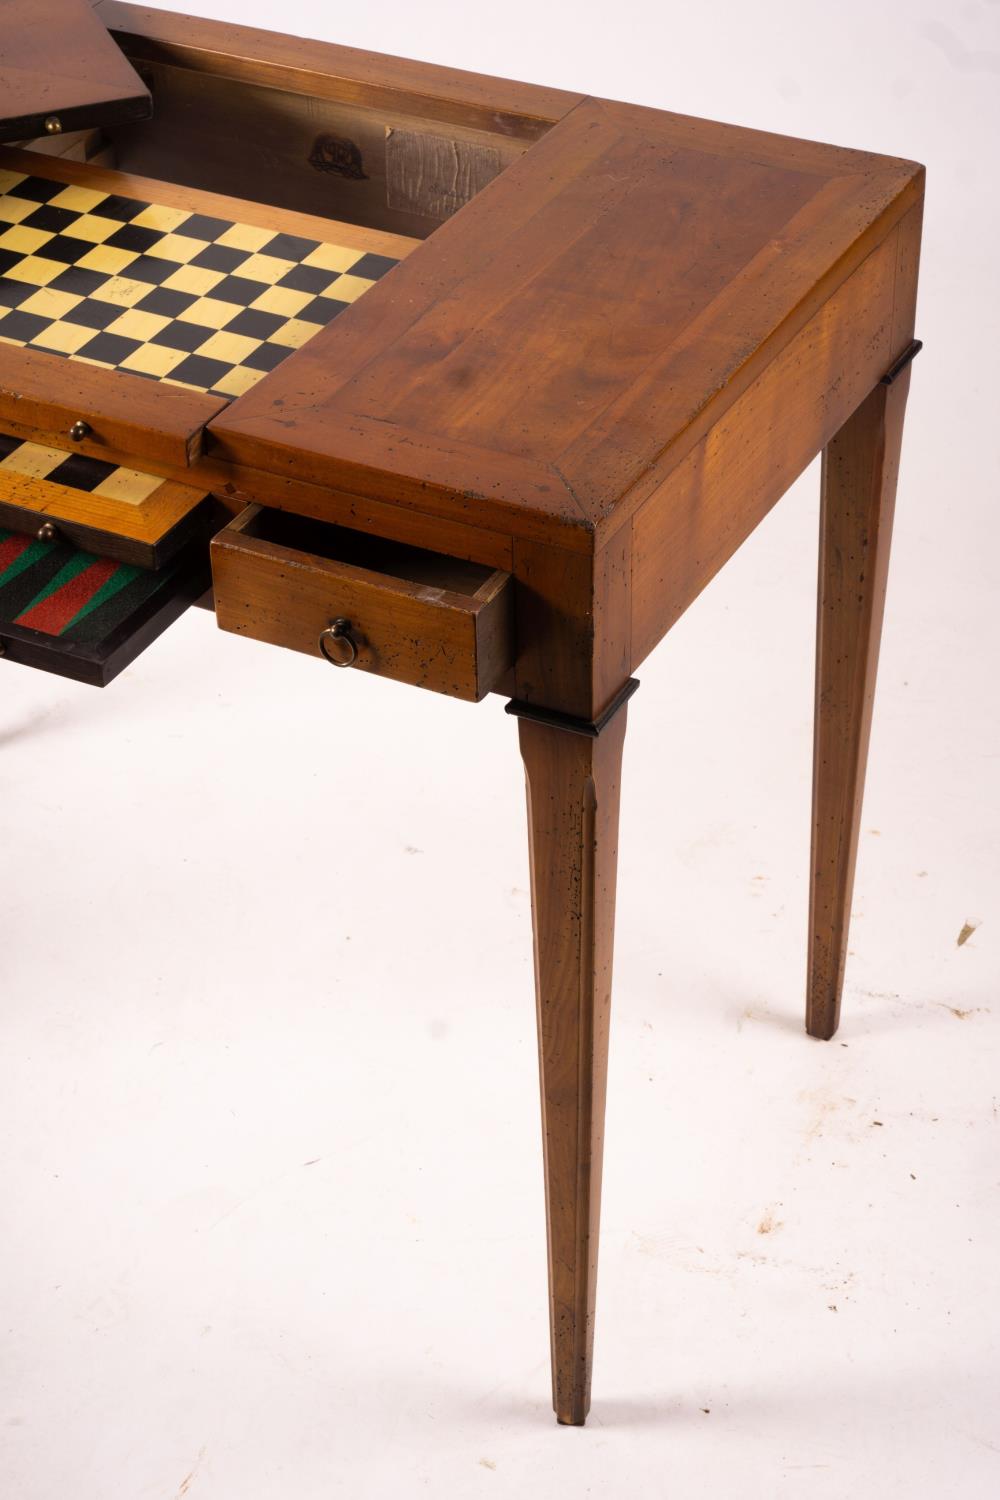 A George III style cherry wood games table with backgammon and chess interior, width 90cm, depth - Image 7 of 10